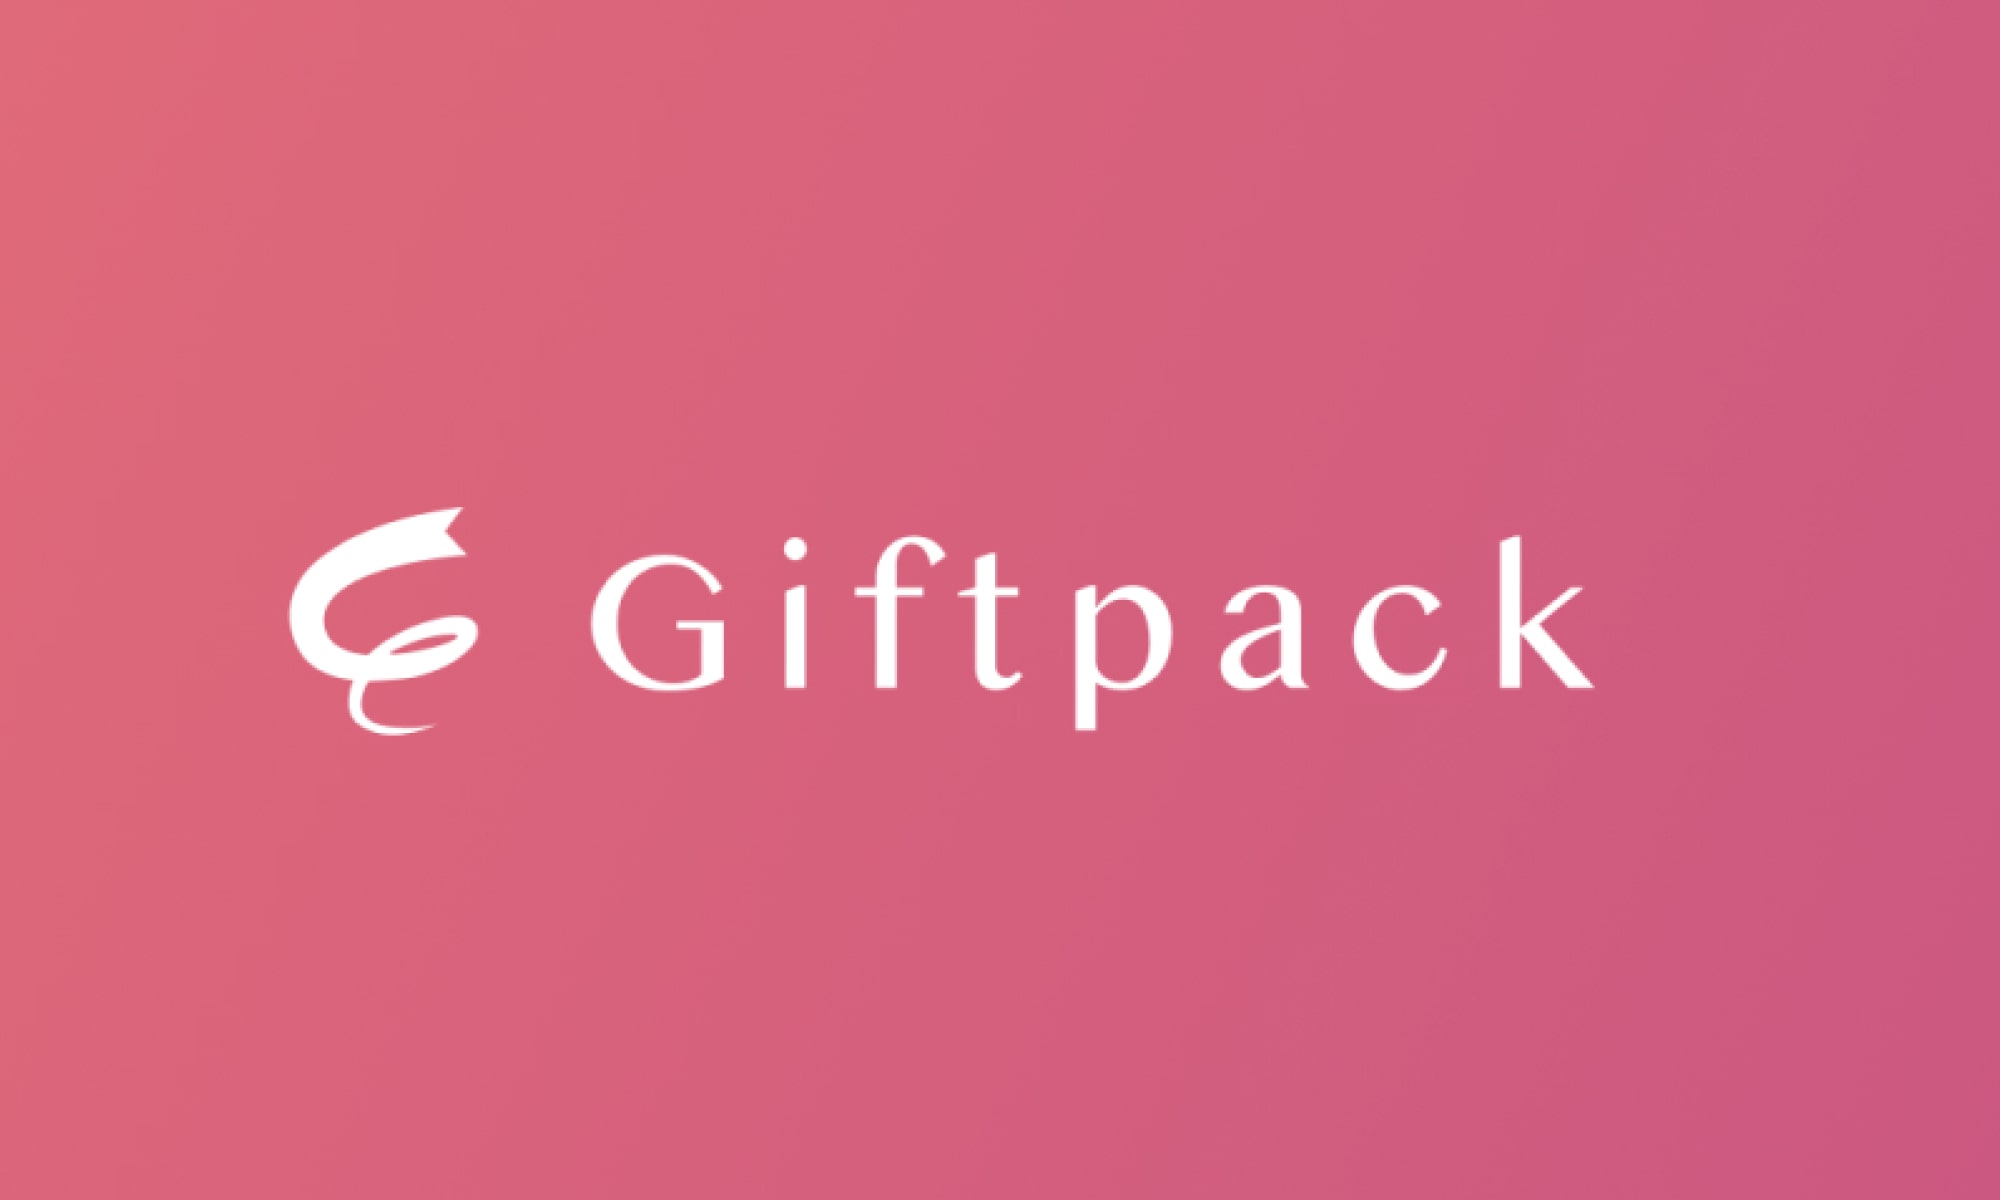 giftpack io logo pink background and white words for event gifts